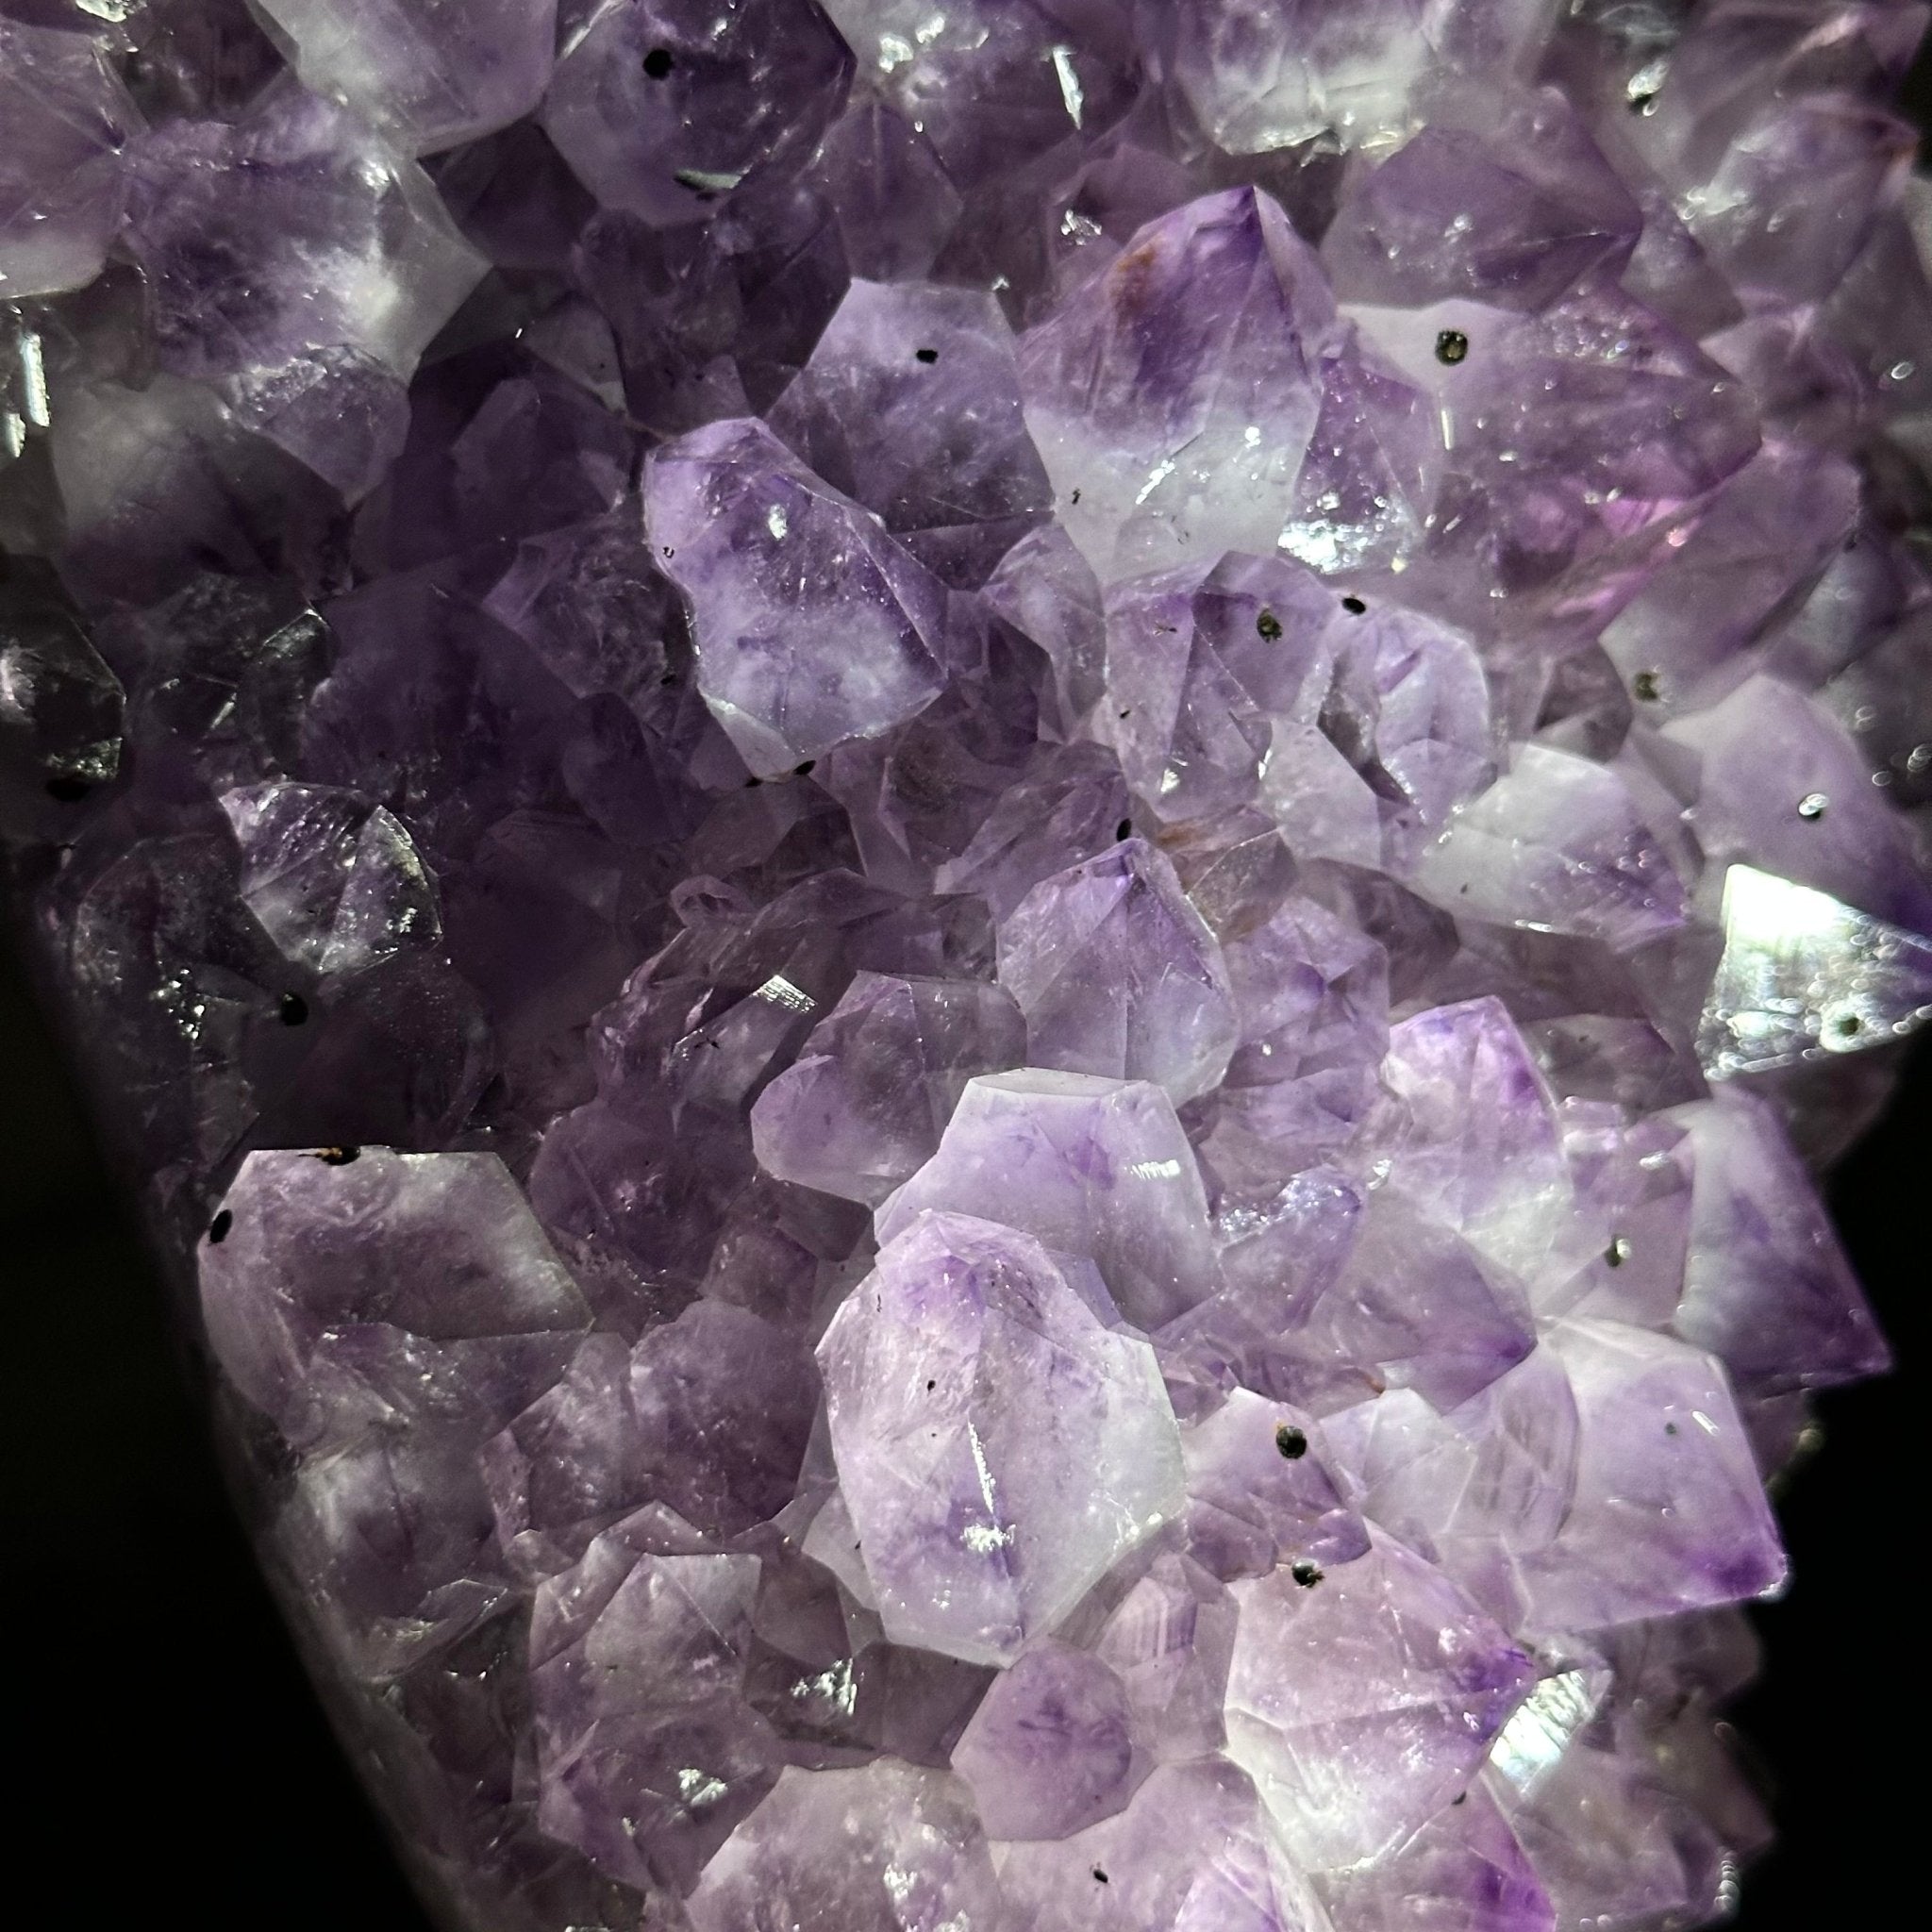 Extra Quality Amethyst Cluster on Cement Base, 13.3 lbs and 12.6" Tall #5614-0106 - Brazil GemsBrazil GemsExtra Quality Amethyst Cluster on Cement Base, 13.3 lbs and 12.6" Tall #5614-0106Clusters on Cement Bases5614-0106